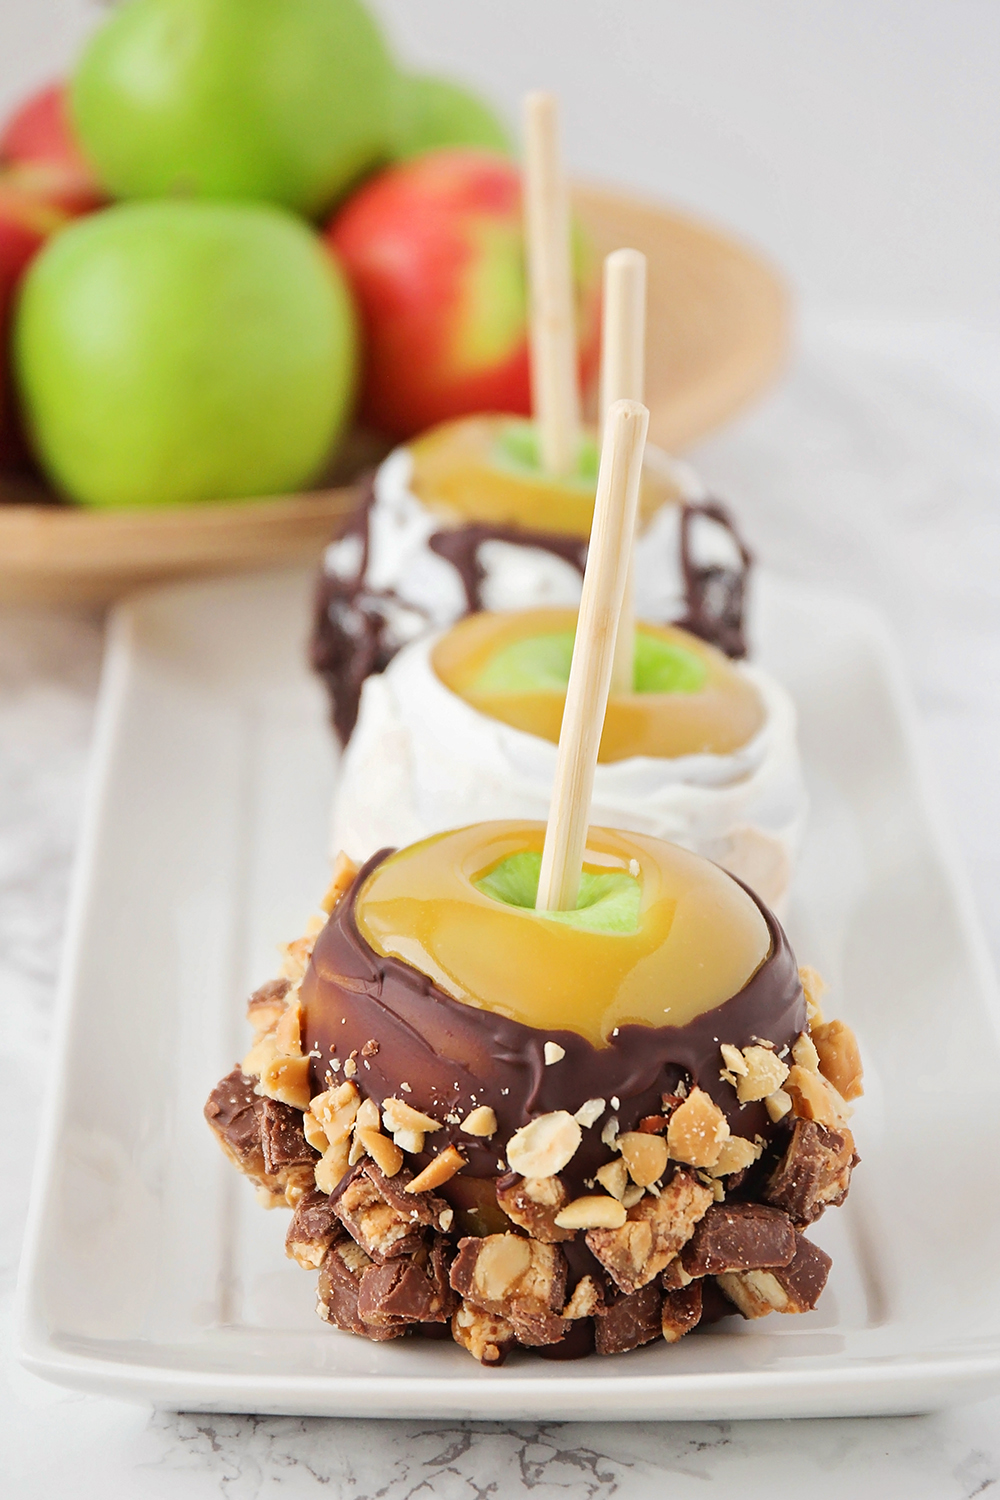 These gourmet caramel apples are made with the best homemade caramel, and taste just like the ones from the candy shop!